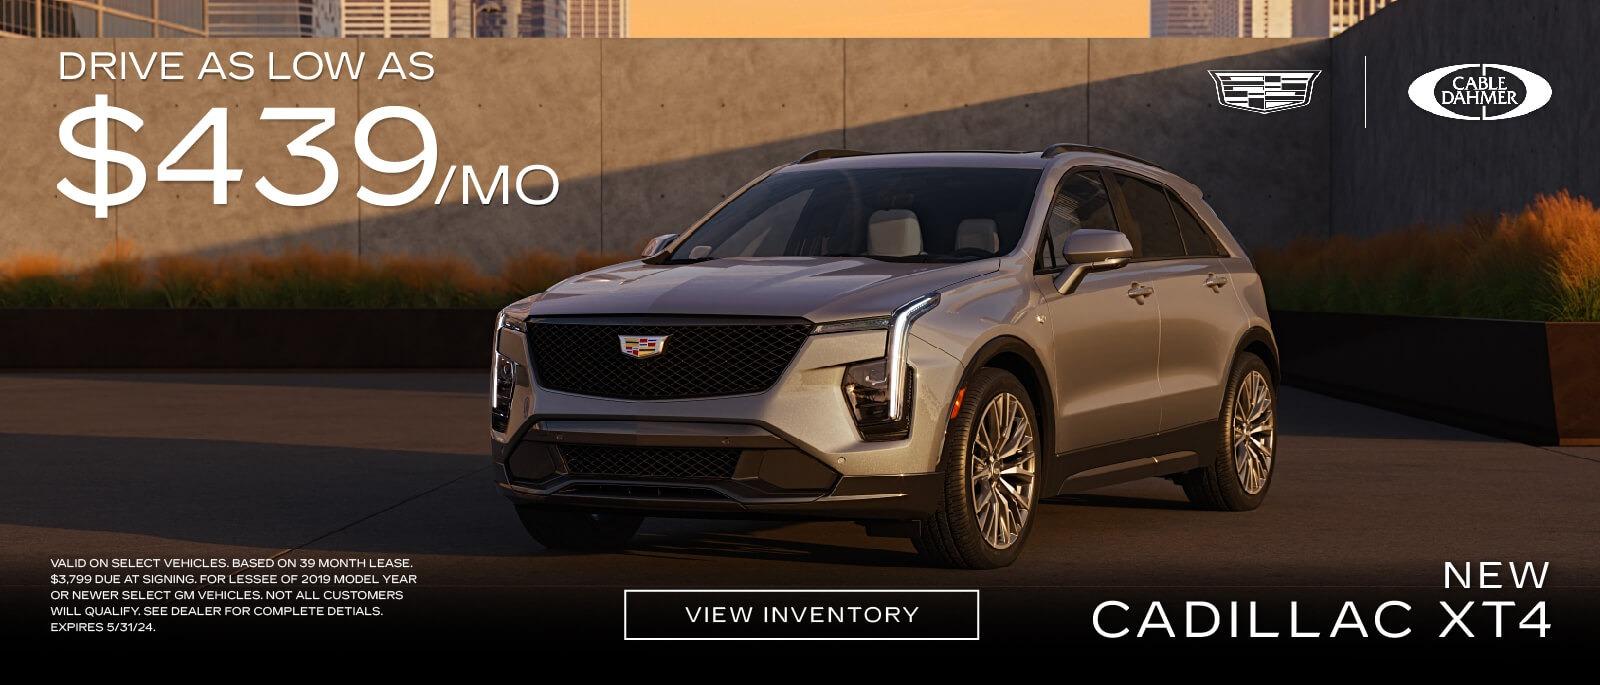 New Cadillac XT4 drive as low as $439 a month in Kansas City